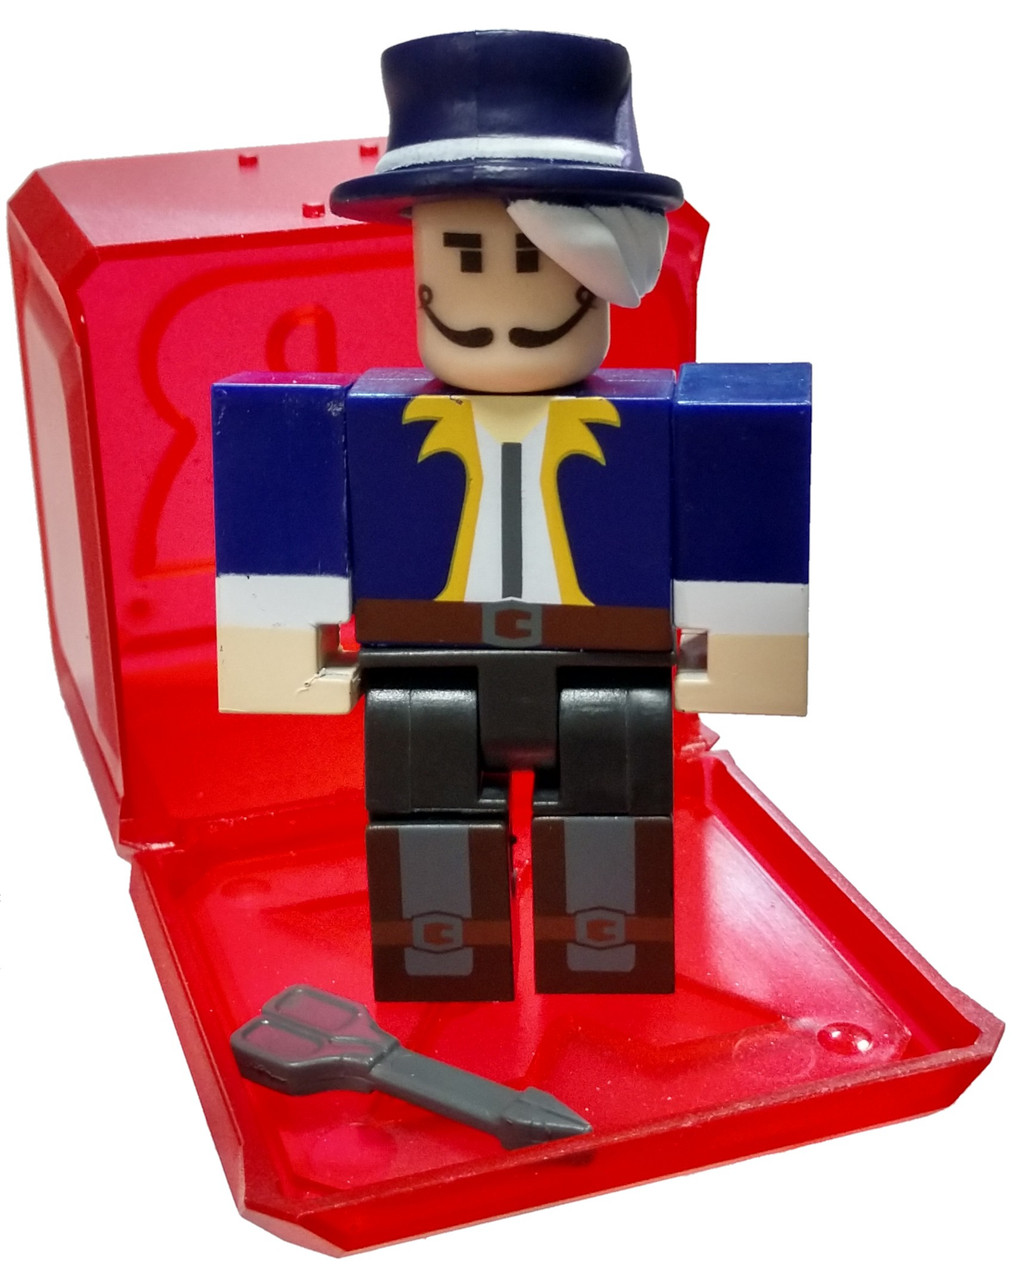 Roblox Celebrity Collection Series 5 Vesteria Barber S 3 Mini Figure With Red Cube And Online Code Loose Jazwares Toywiz - cuphead roblox song id roblox free play login